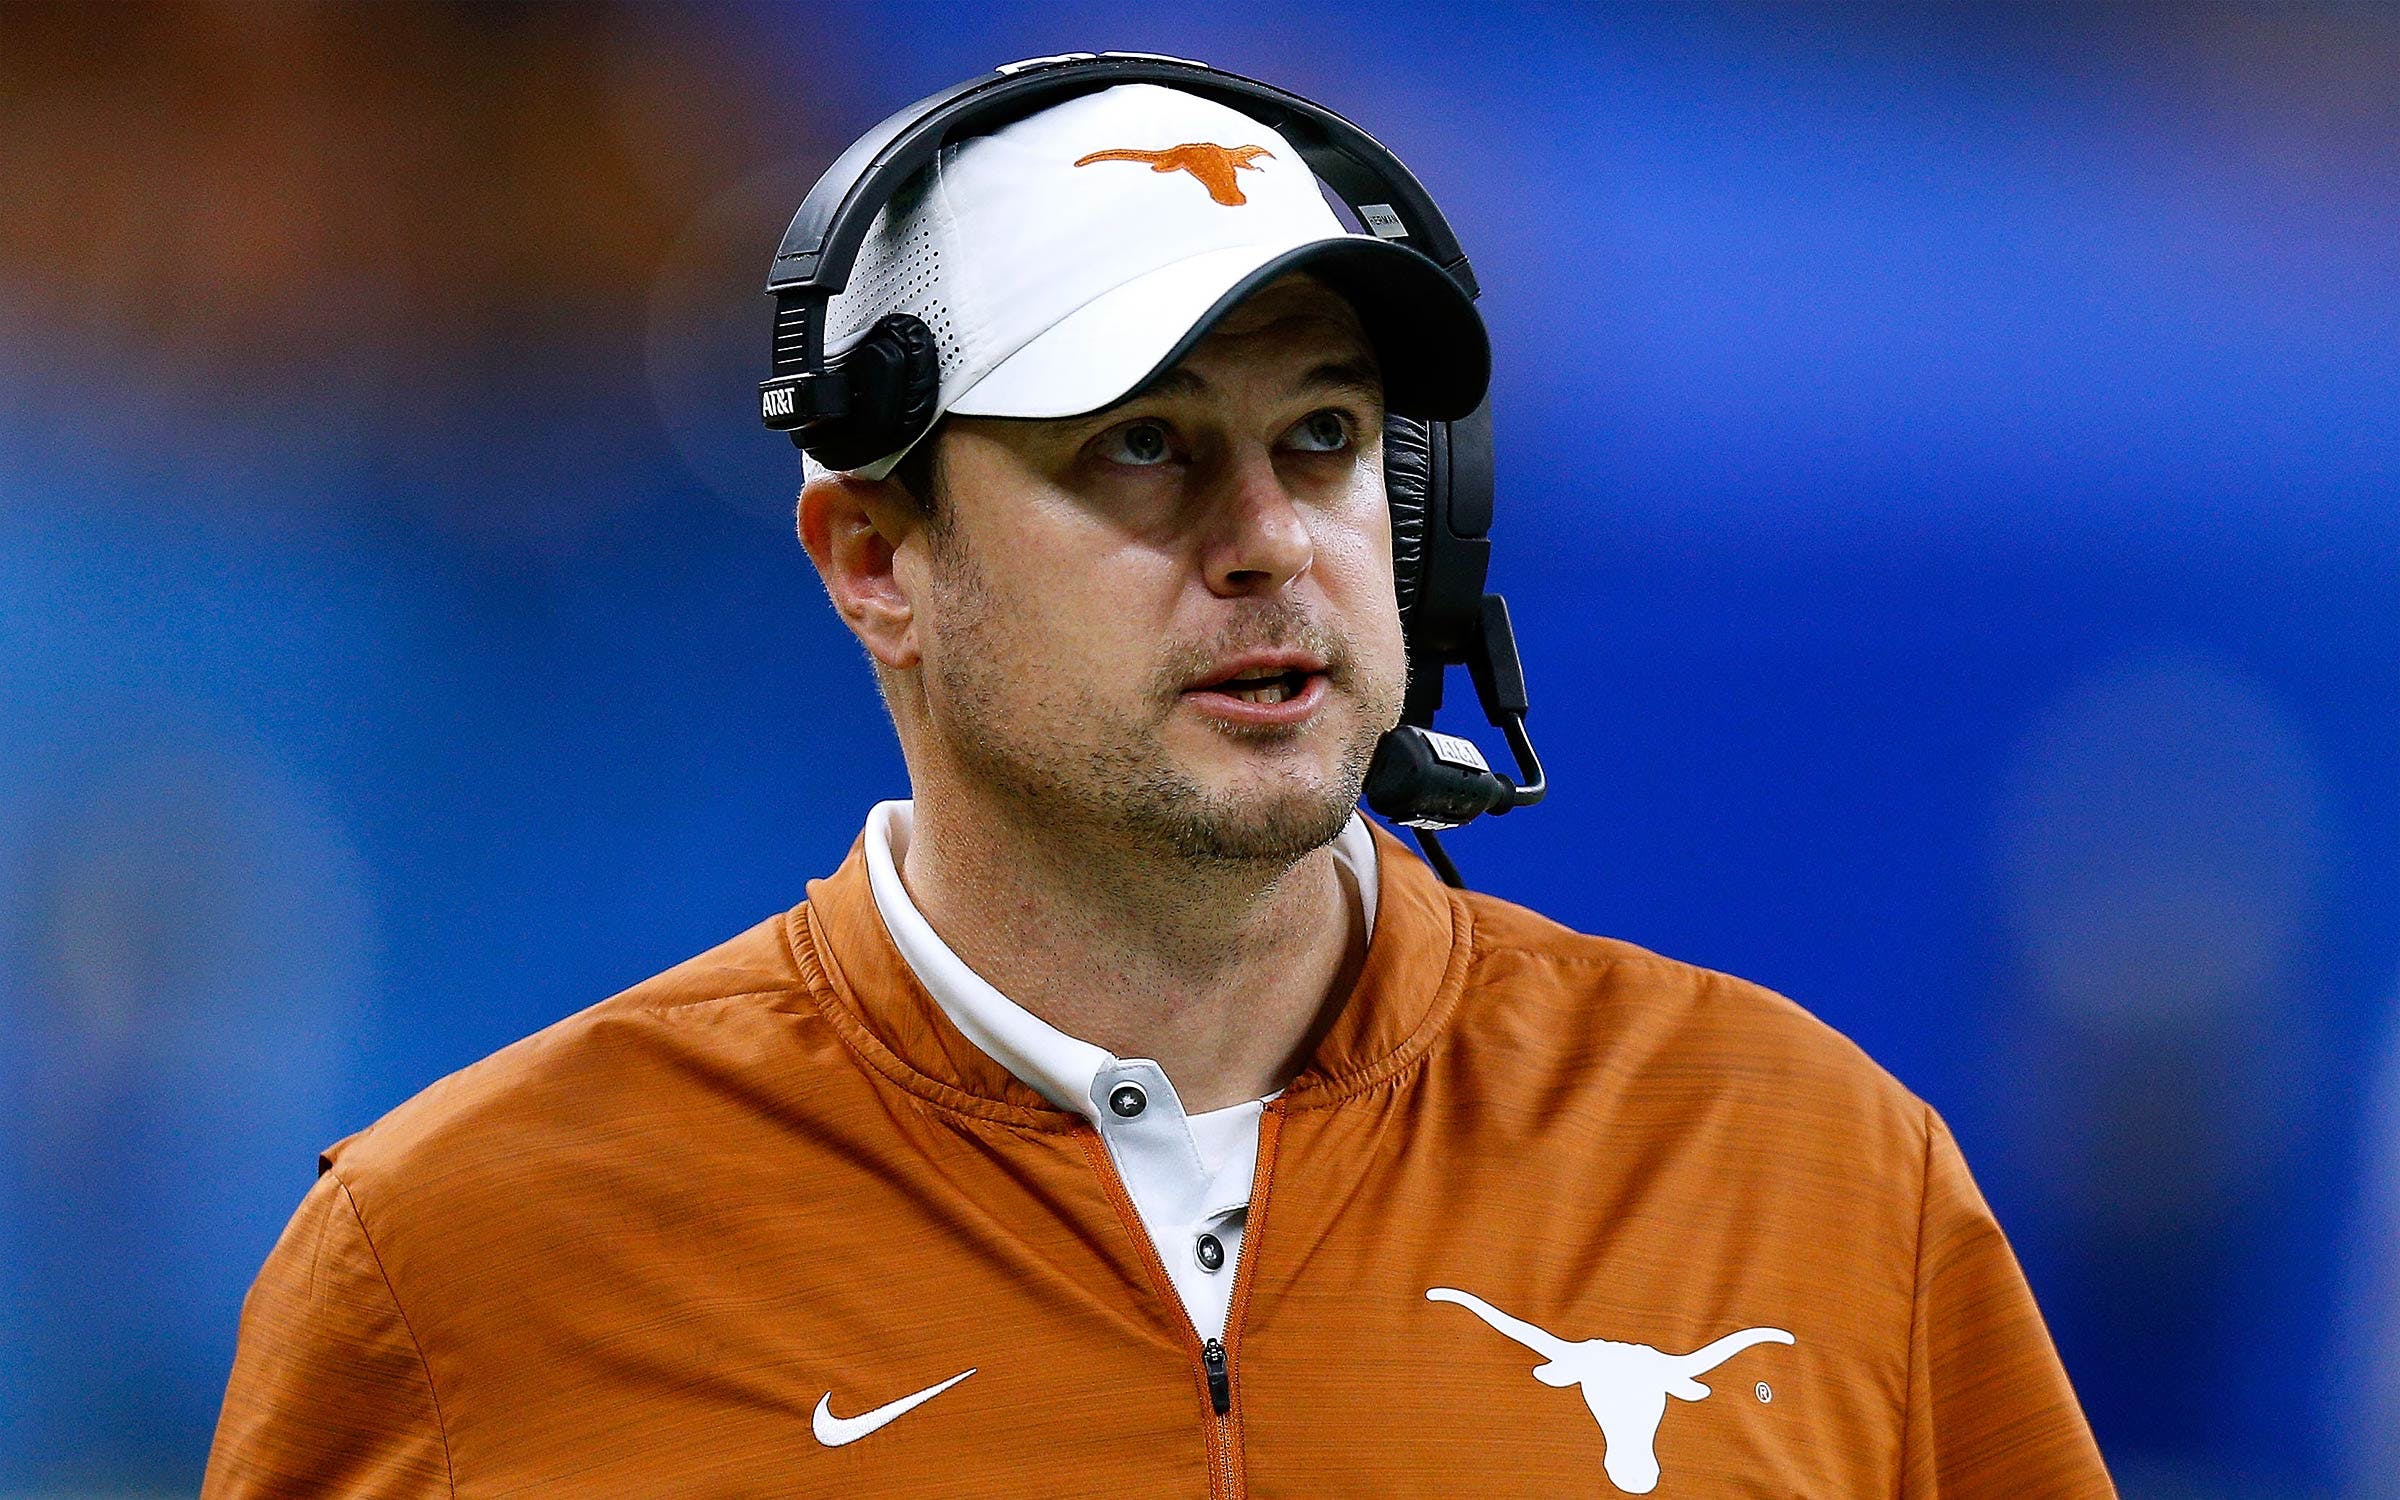 Texas head coach Tom Herman stands on the sideline during a college football game.